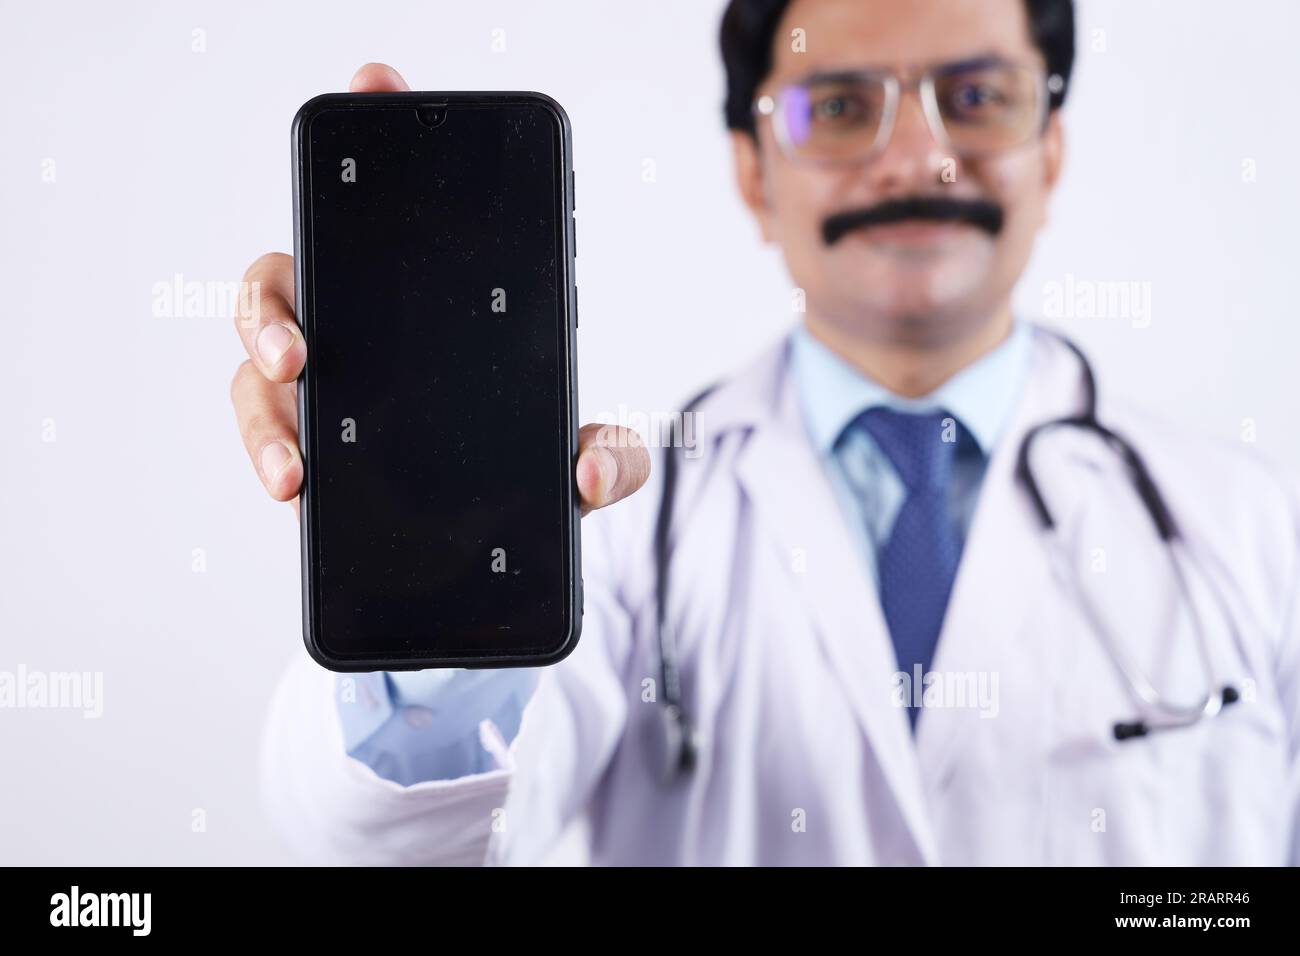 Beautiful portrait of happy Indian doctor in uniform wearing stethoscope and specs showing phone screen in hand. Showing mobile app. Stock Photo